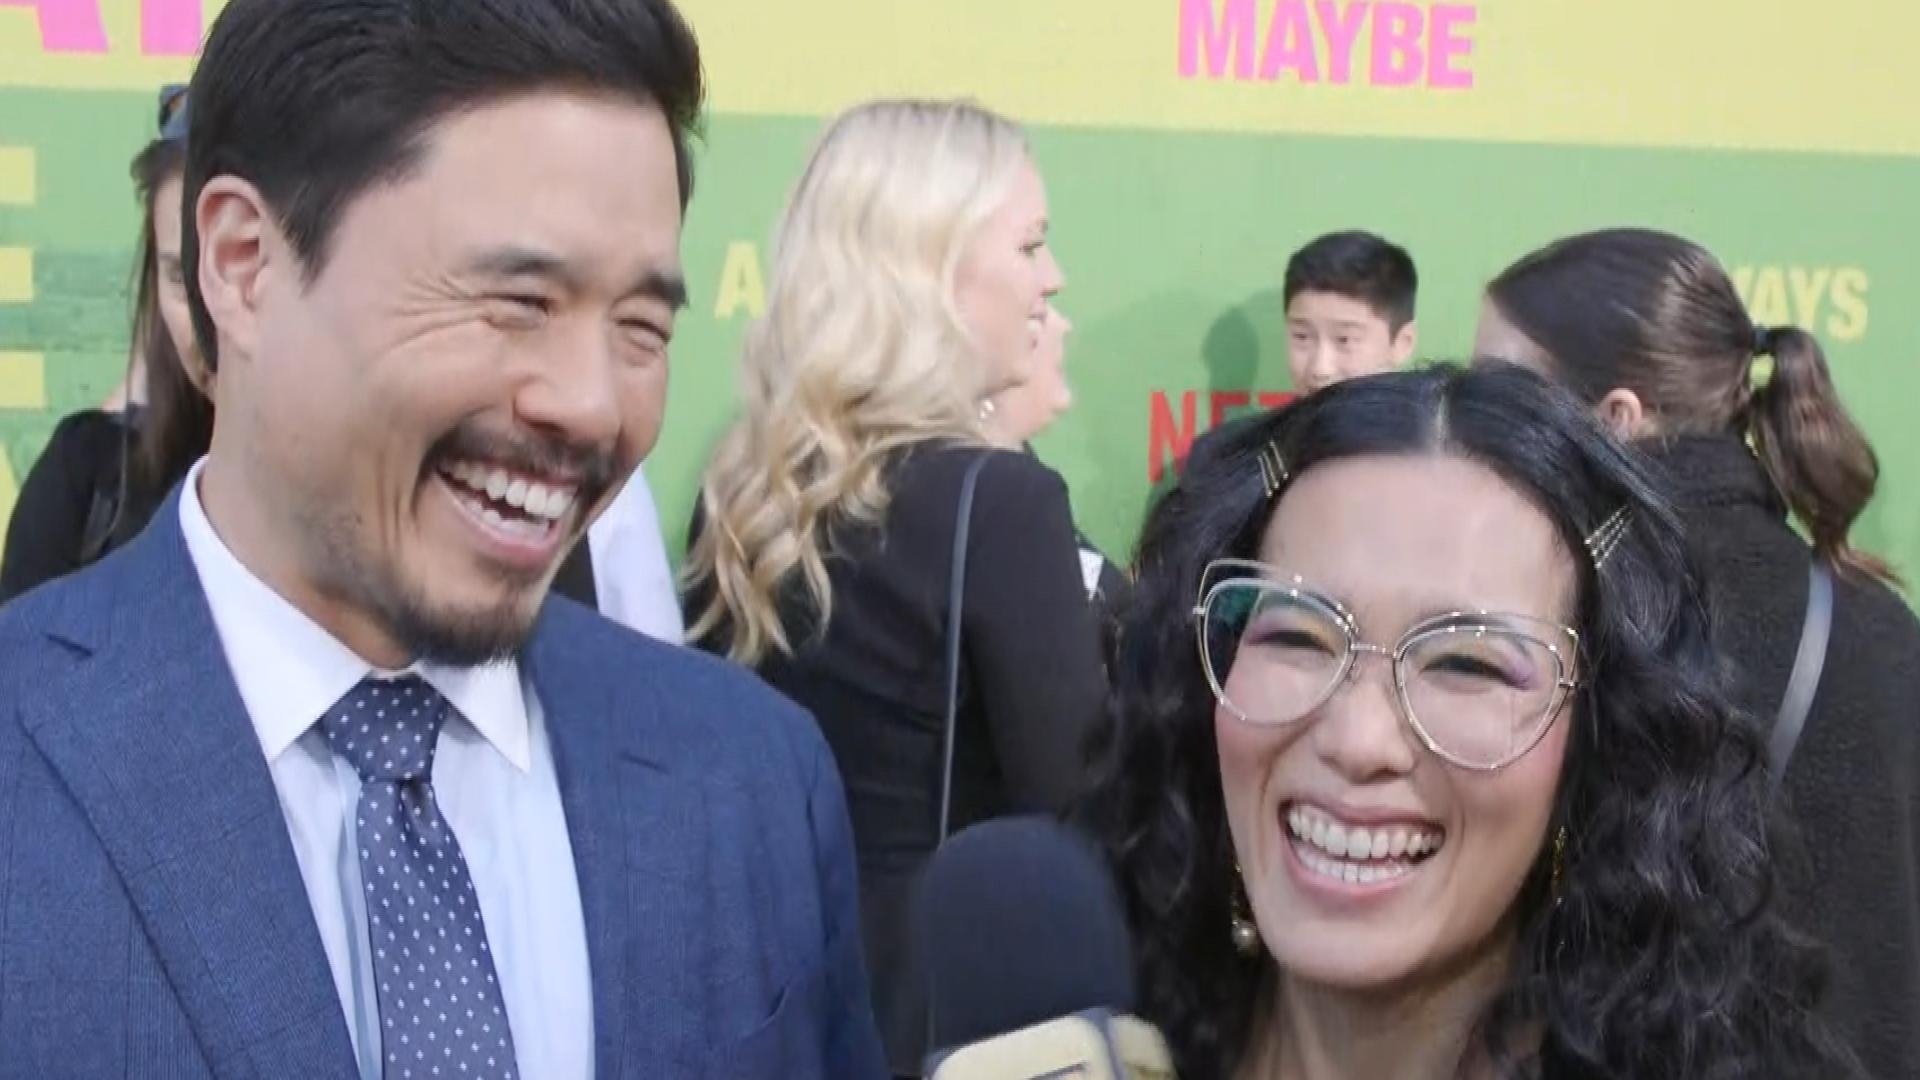 Randall Park ‘Thrilled’ About Fresh Off the Boat Renewal After Constance Wu Controversial Tweets